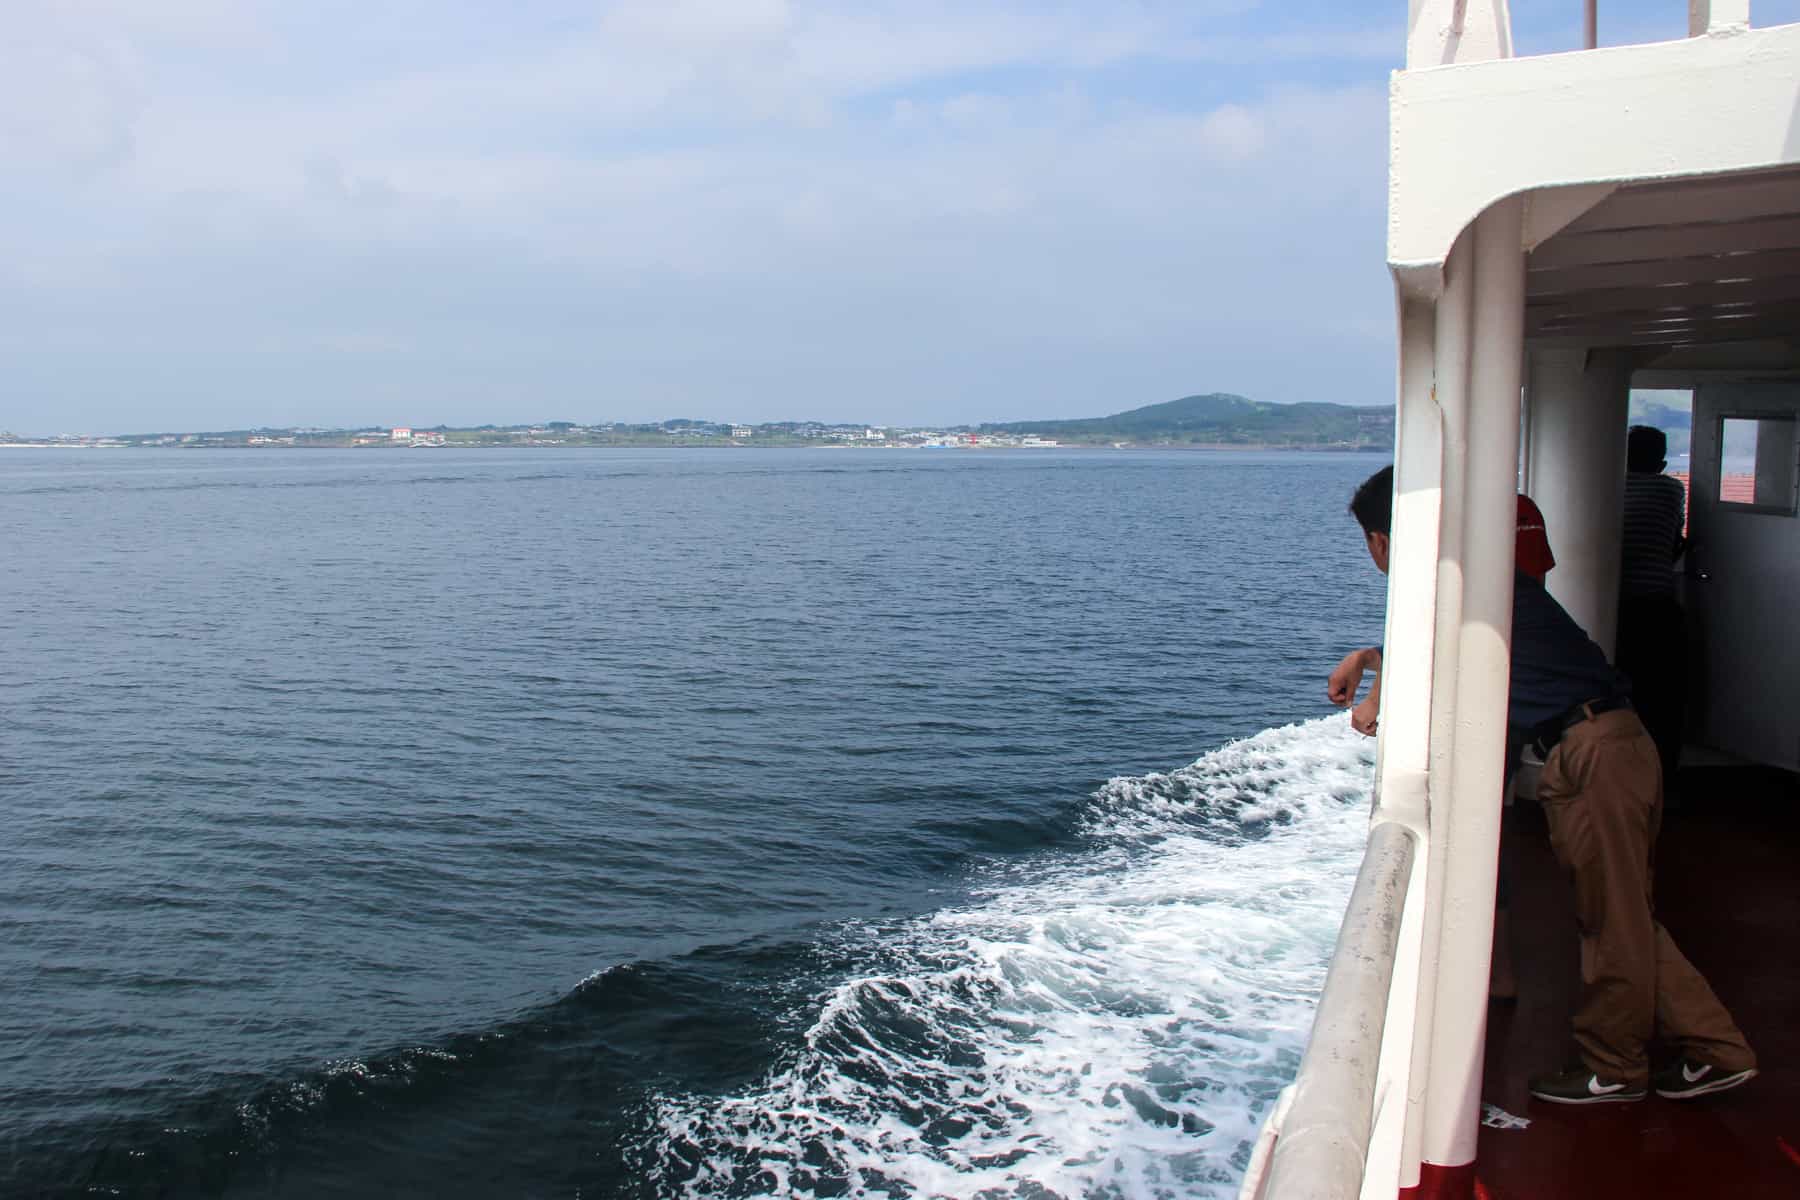 A man leans out from the side of a white ferry to Jeju Island Korea. The ocean is a grey blue and you can see the low volcanic peaks of the island in the background.